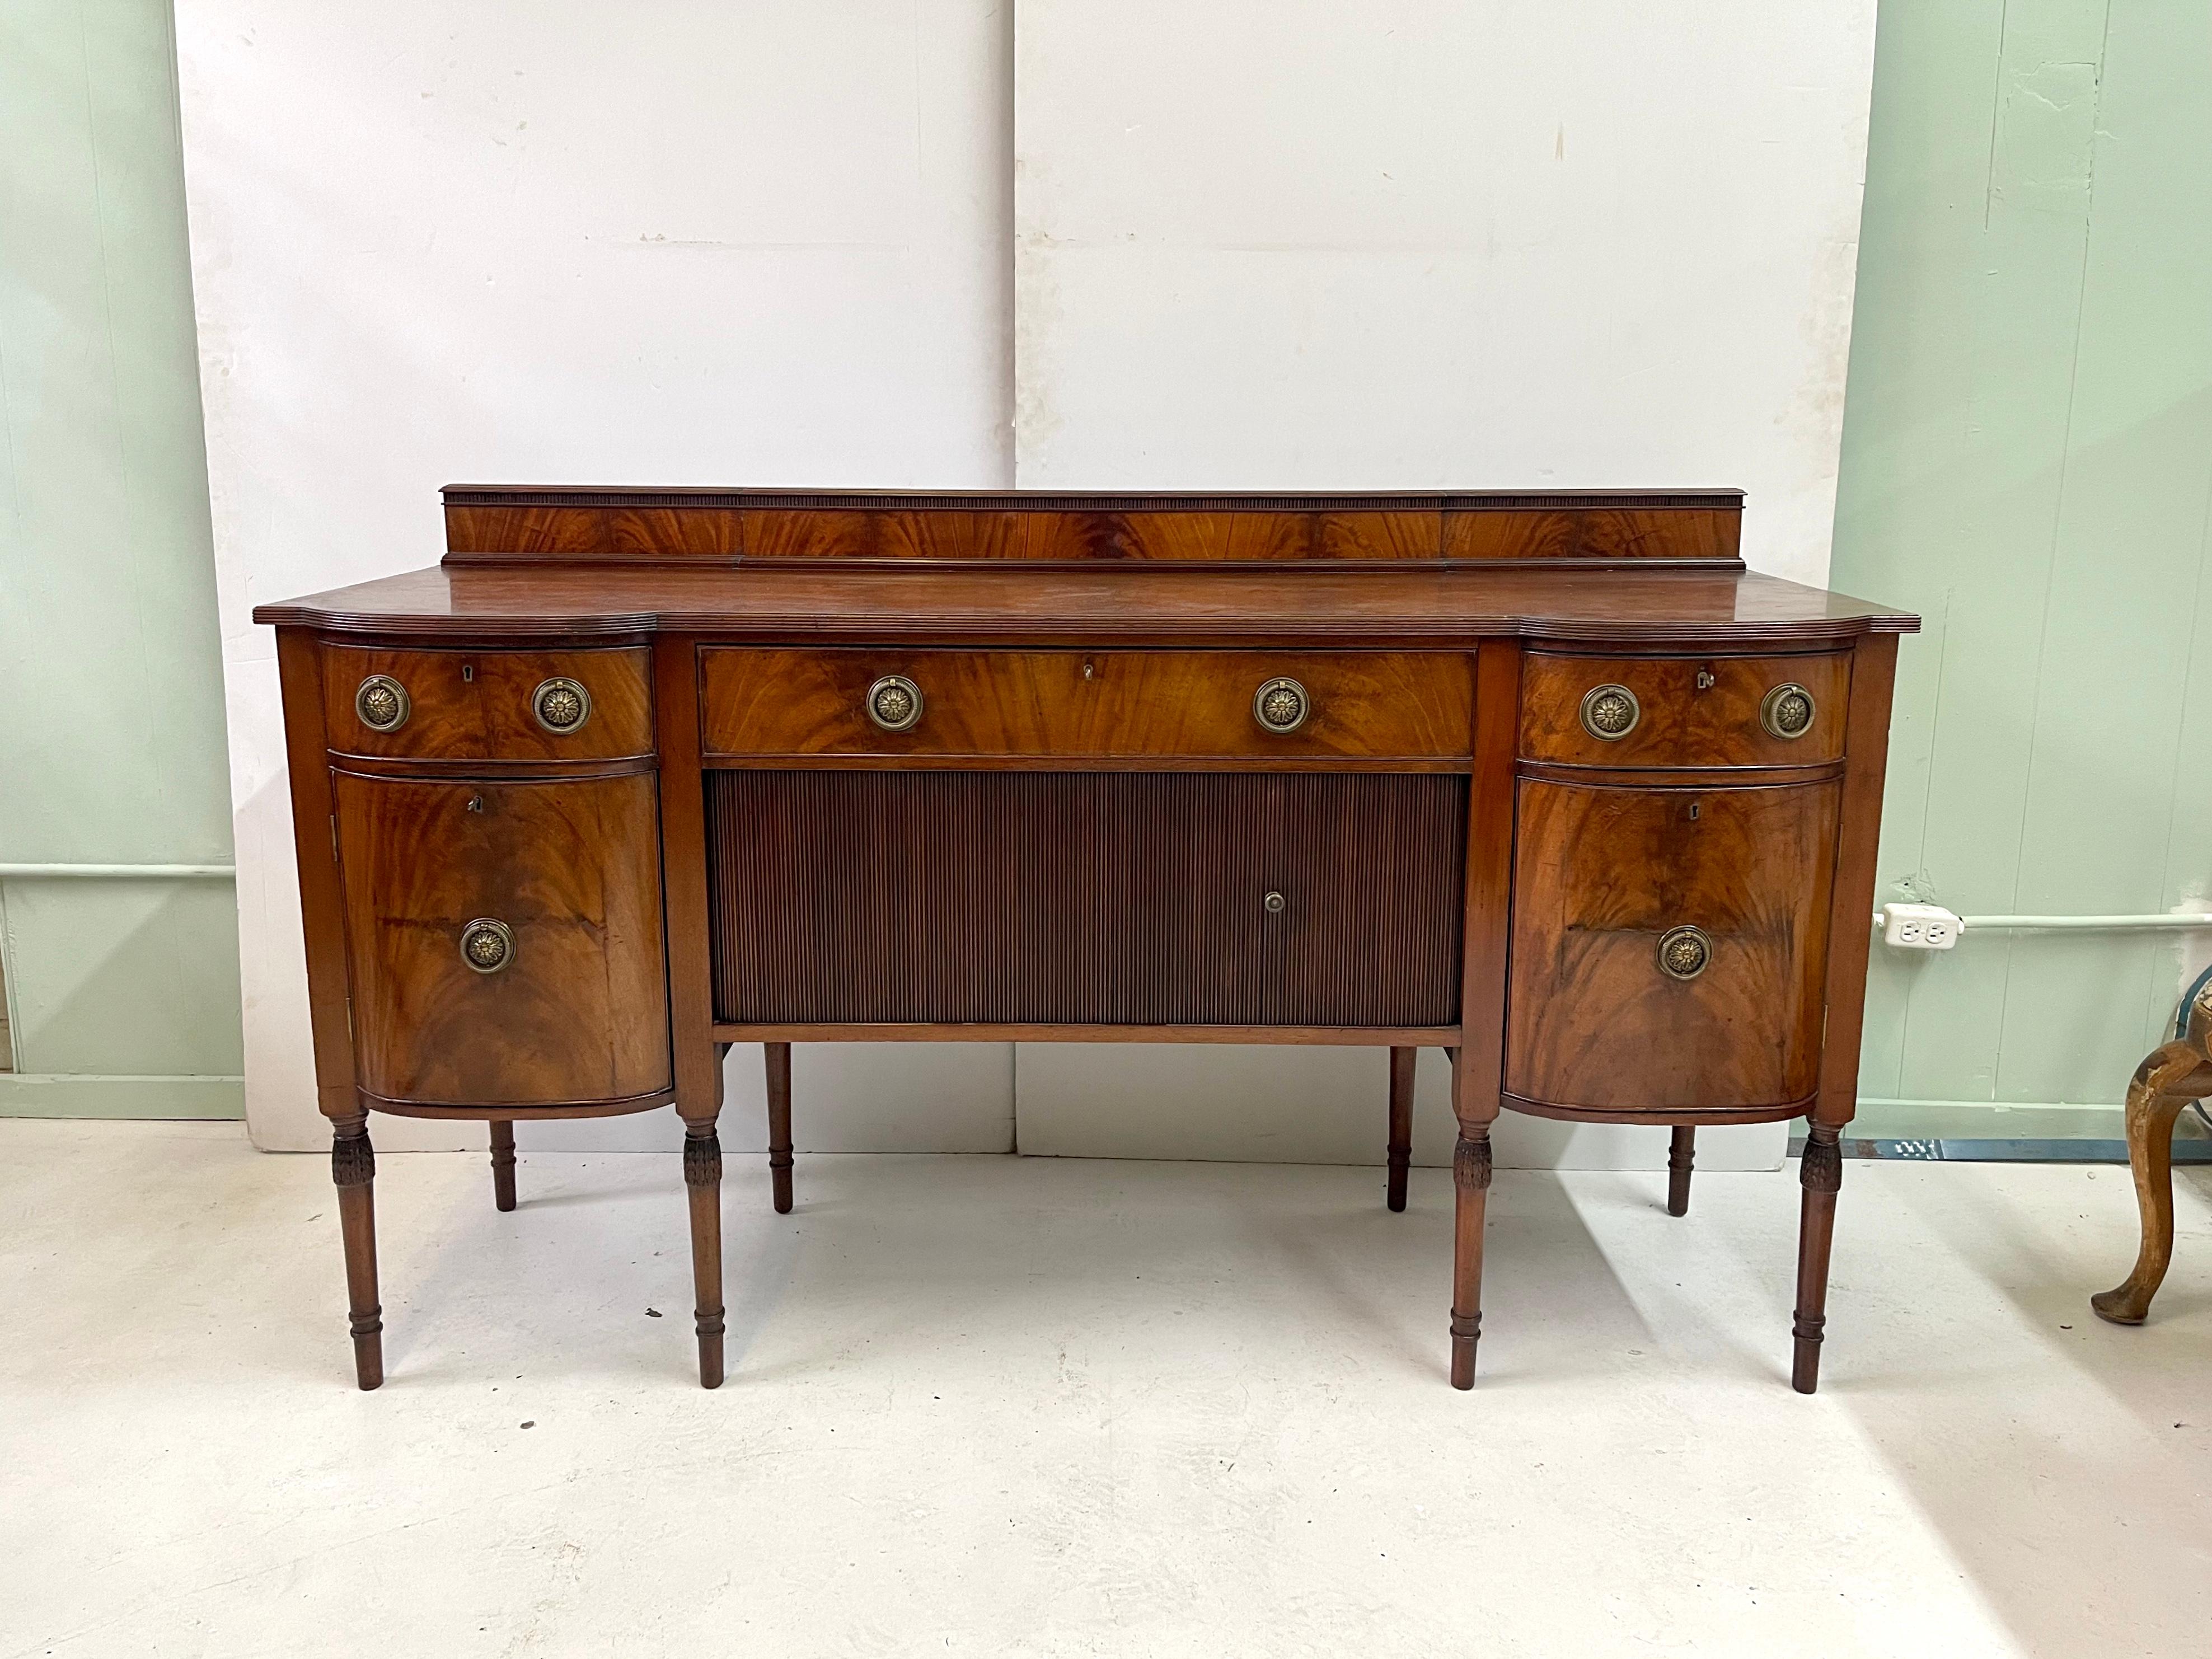 Exceptional quality 19th century English Georgian sideboard of flame mahogany. The one board top is beautifully shaped with an intricate reeded edge detail and a decorative backsplash. In the sideboard's frieze is a wide center drawer flanked by a